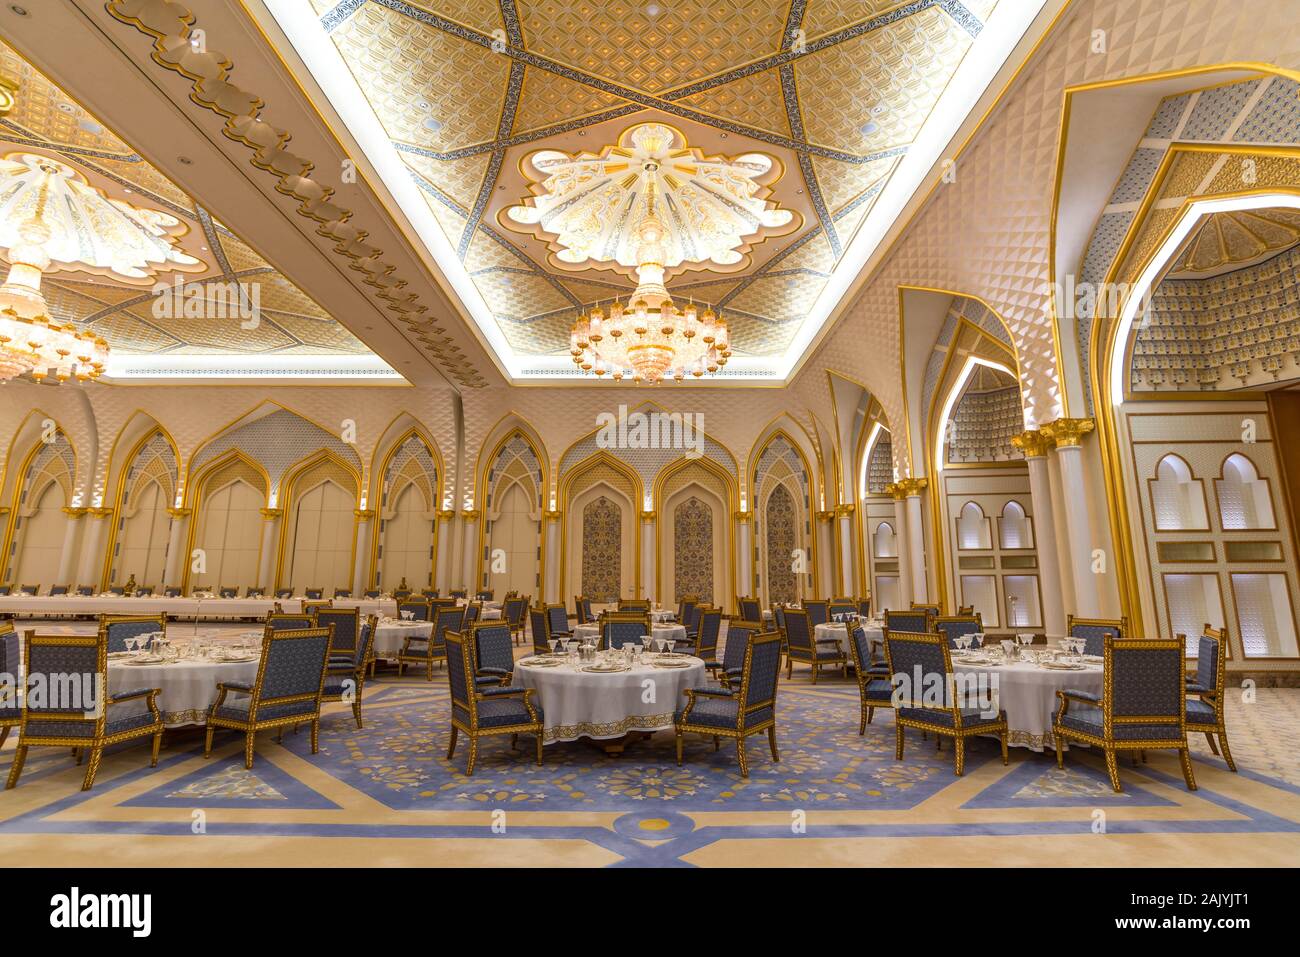 Abu Dhabi, United Arab Emirates: Sumptuous interiors of Presidential Palace (Qasr Al Watan) dining room, round tables and chairs, Palace of the Nation Stock Photo